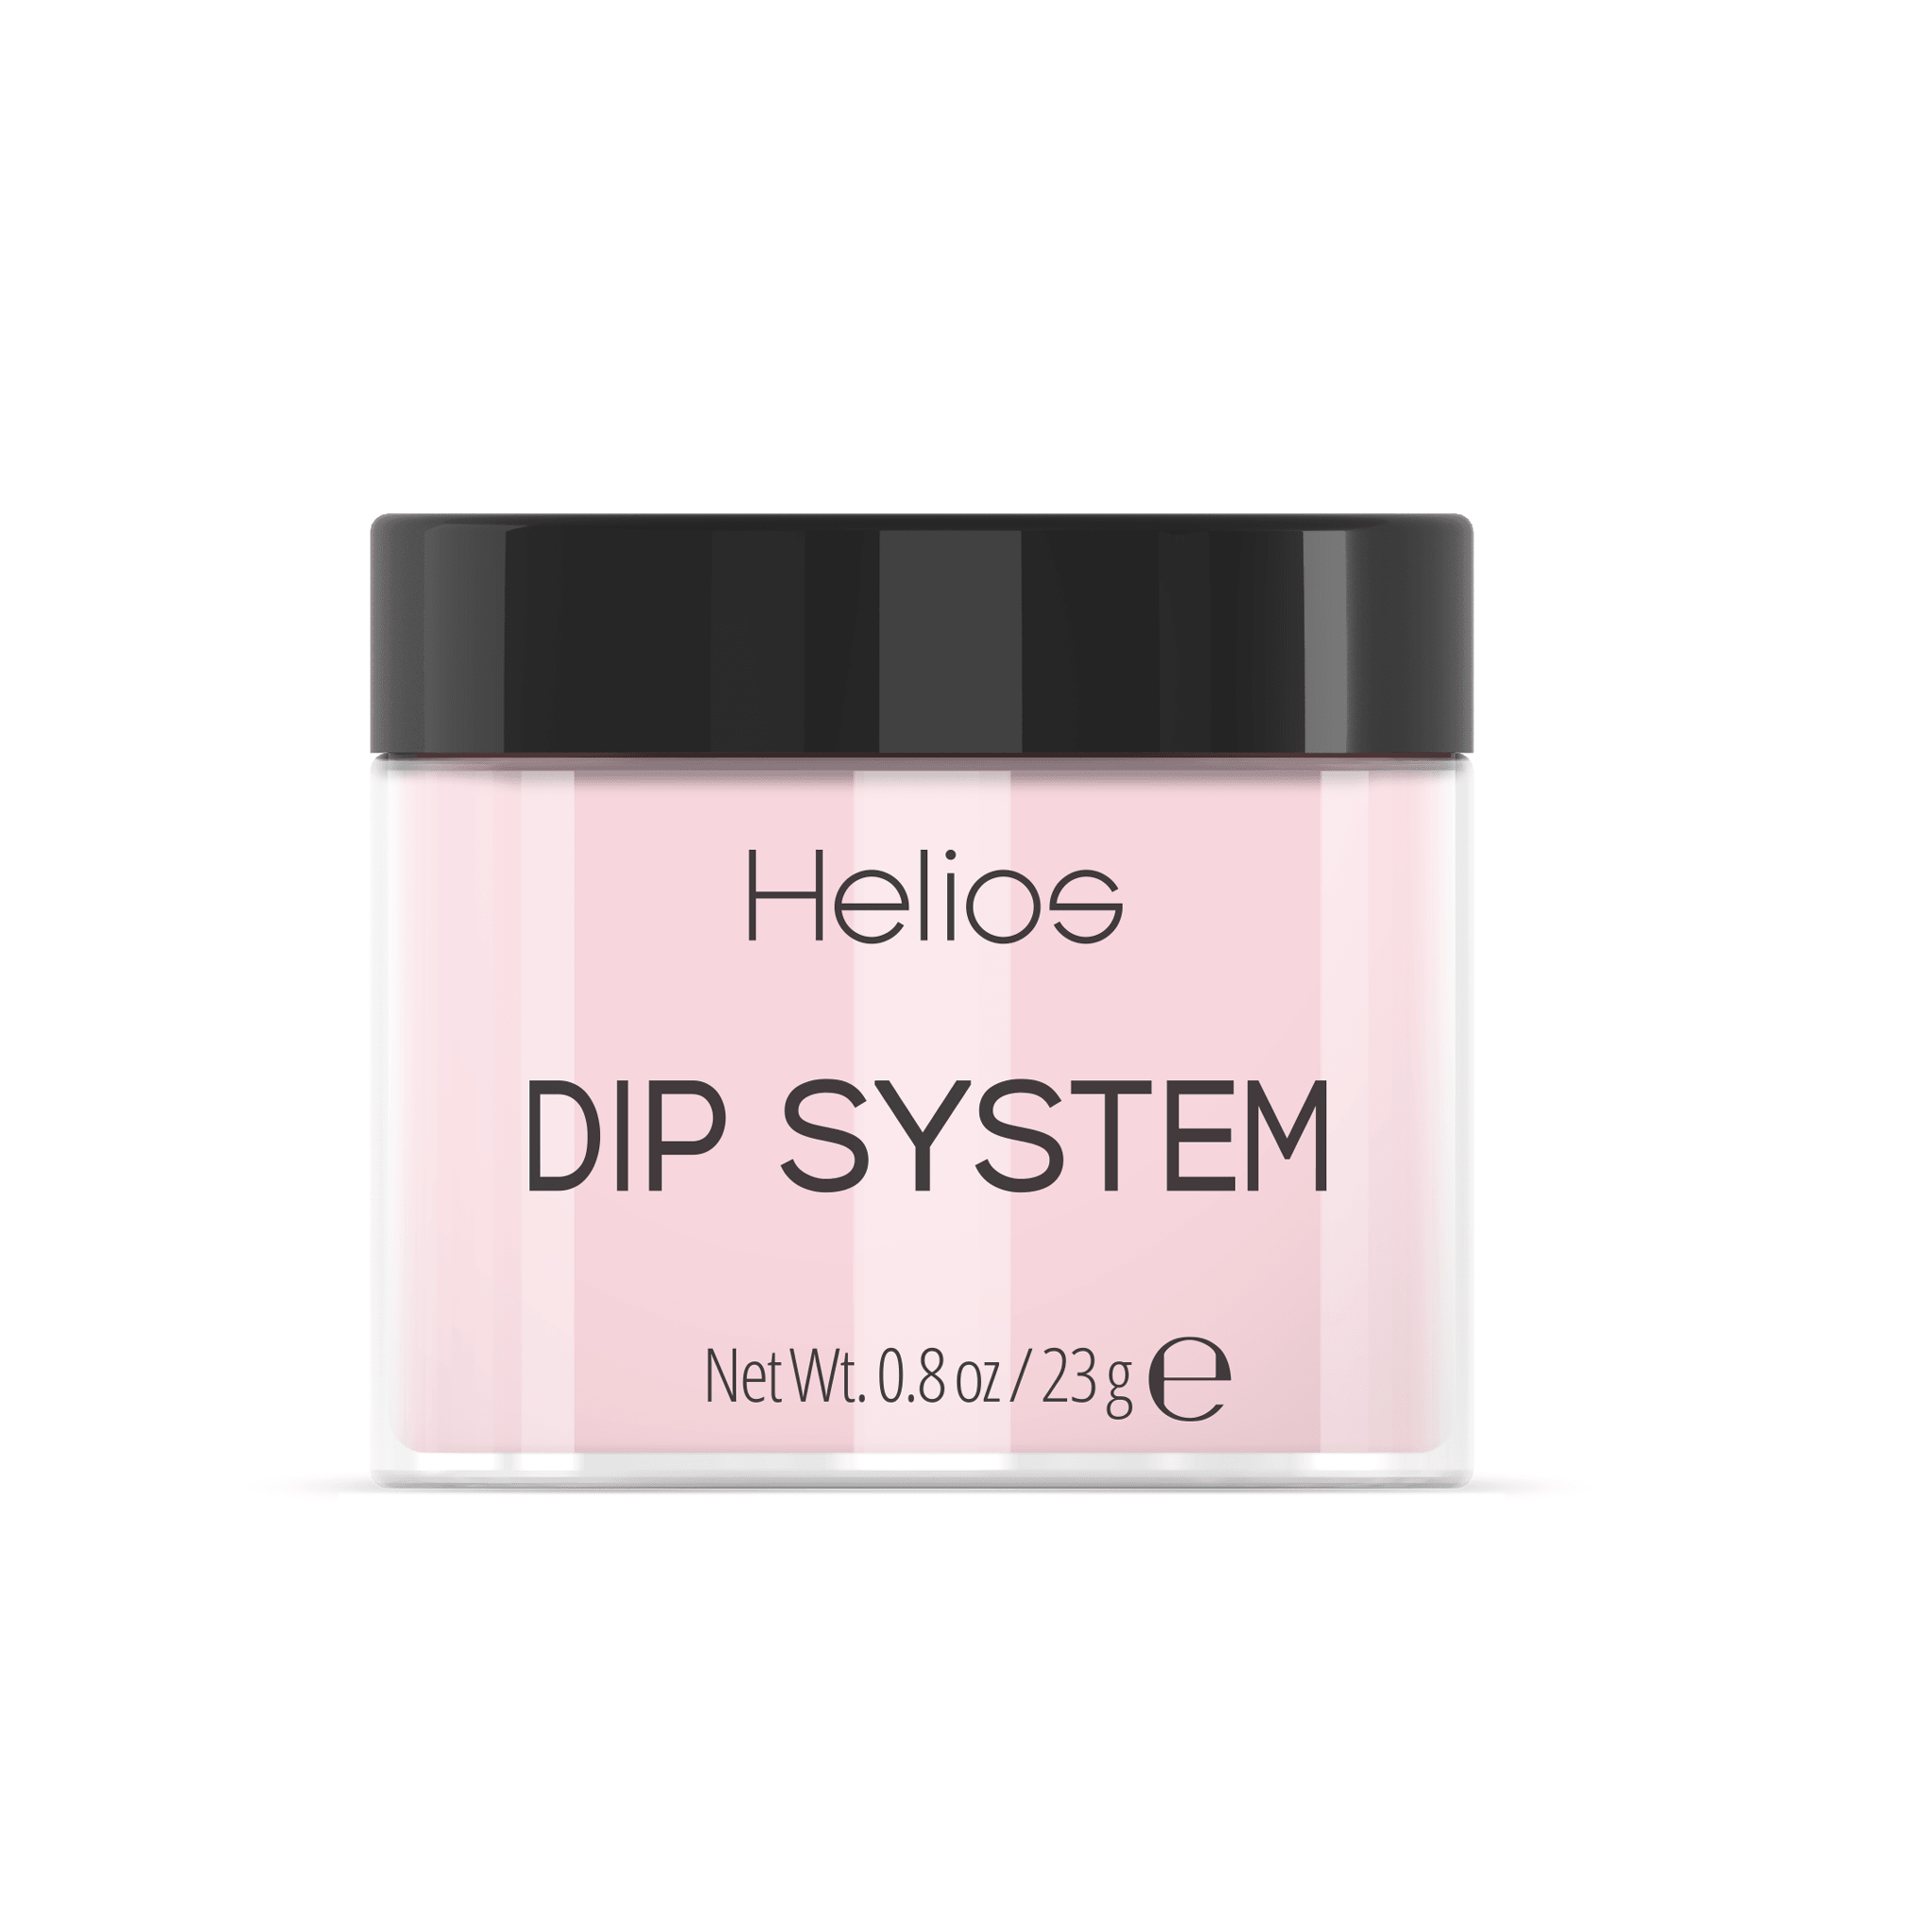 DIP SYSTEM - COVER GIRL WORTHY - Helios Nail Systems